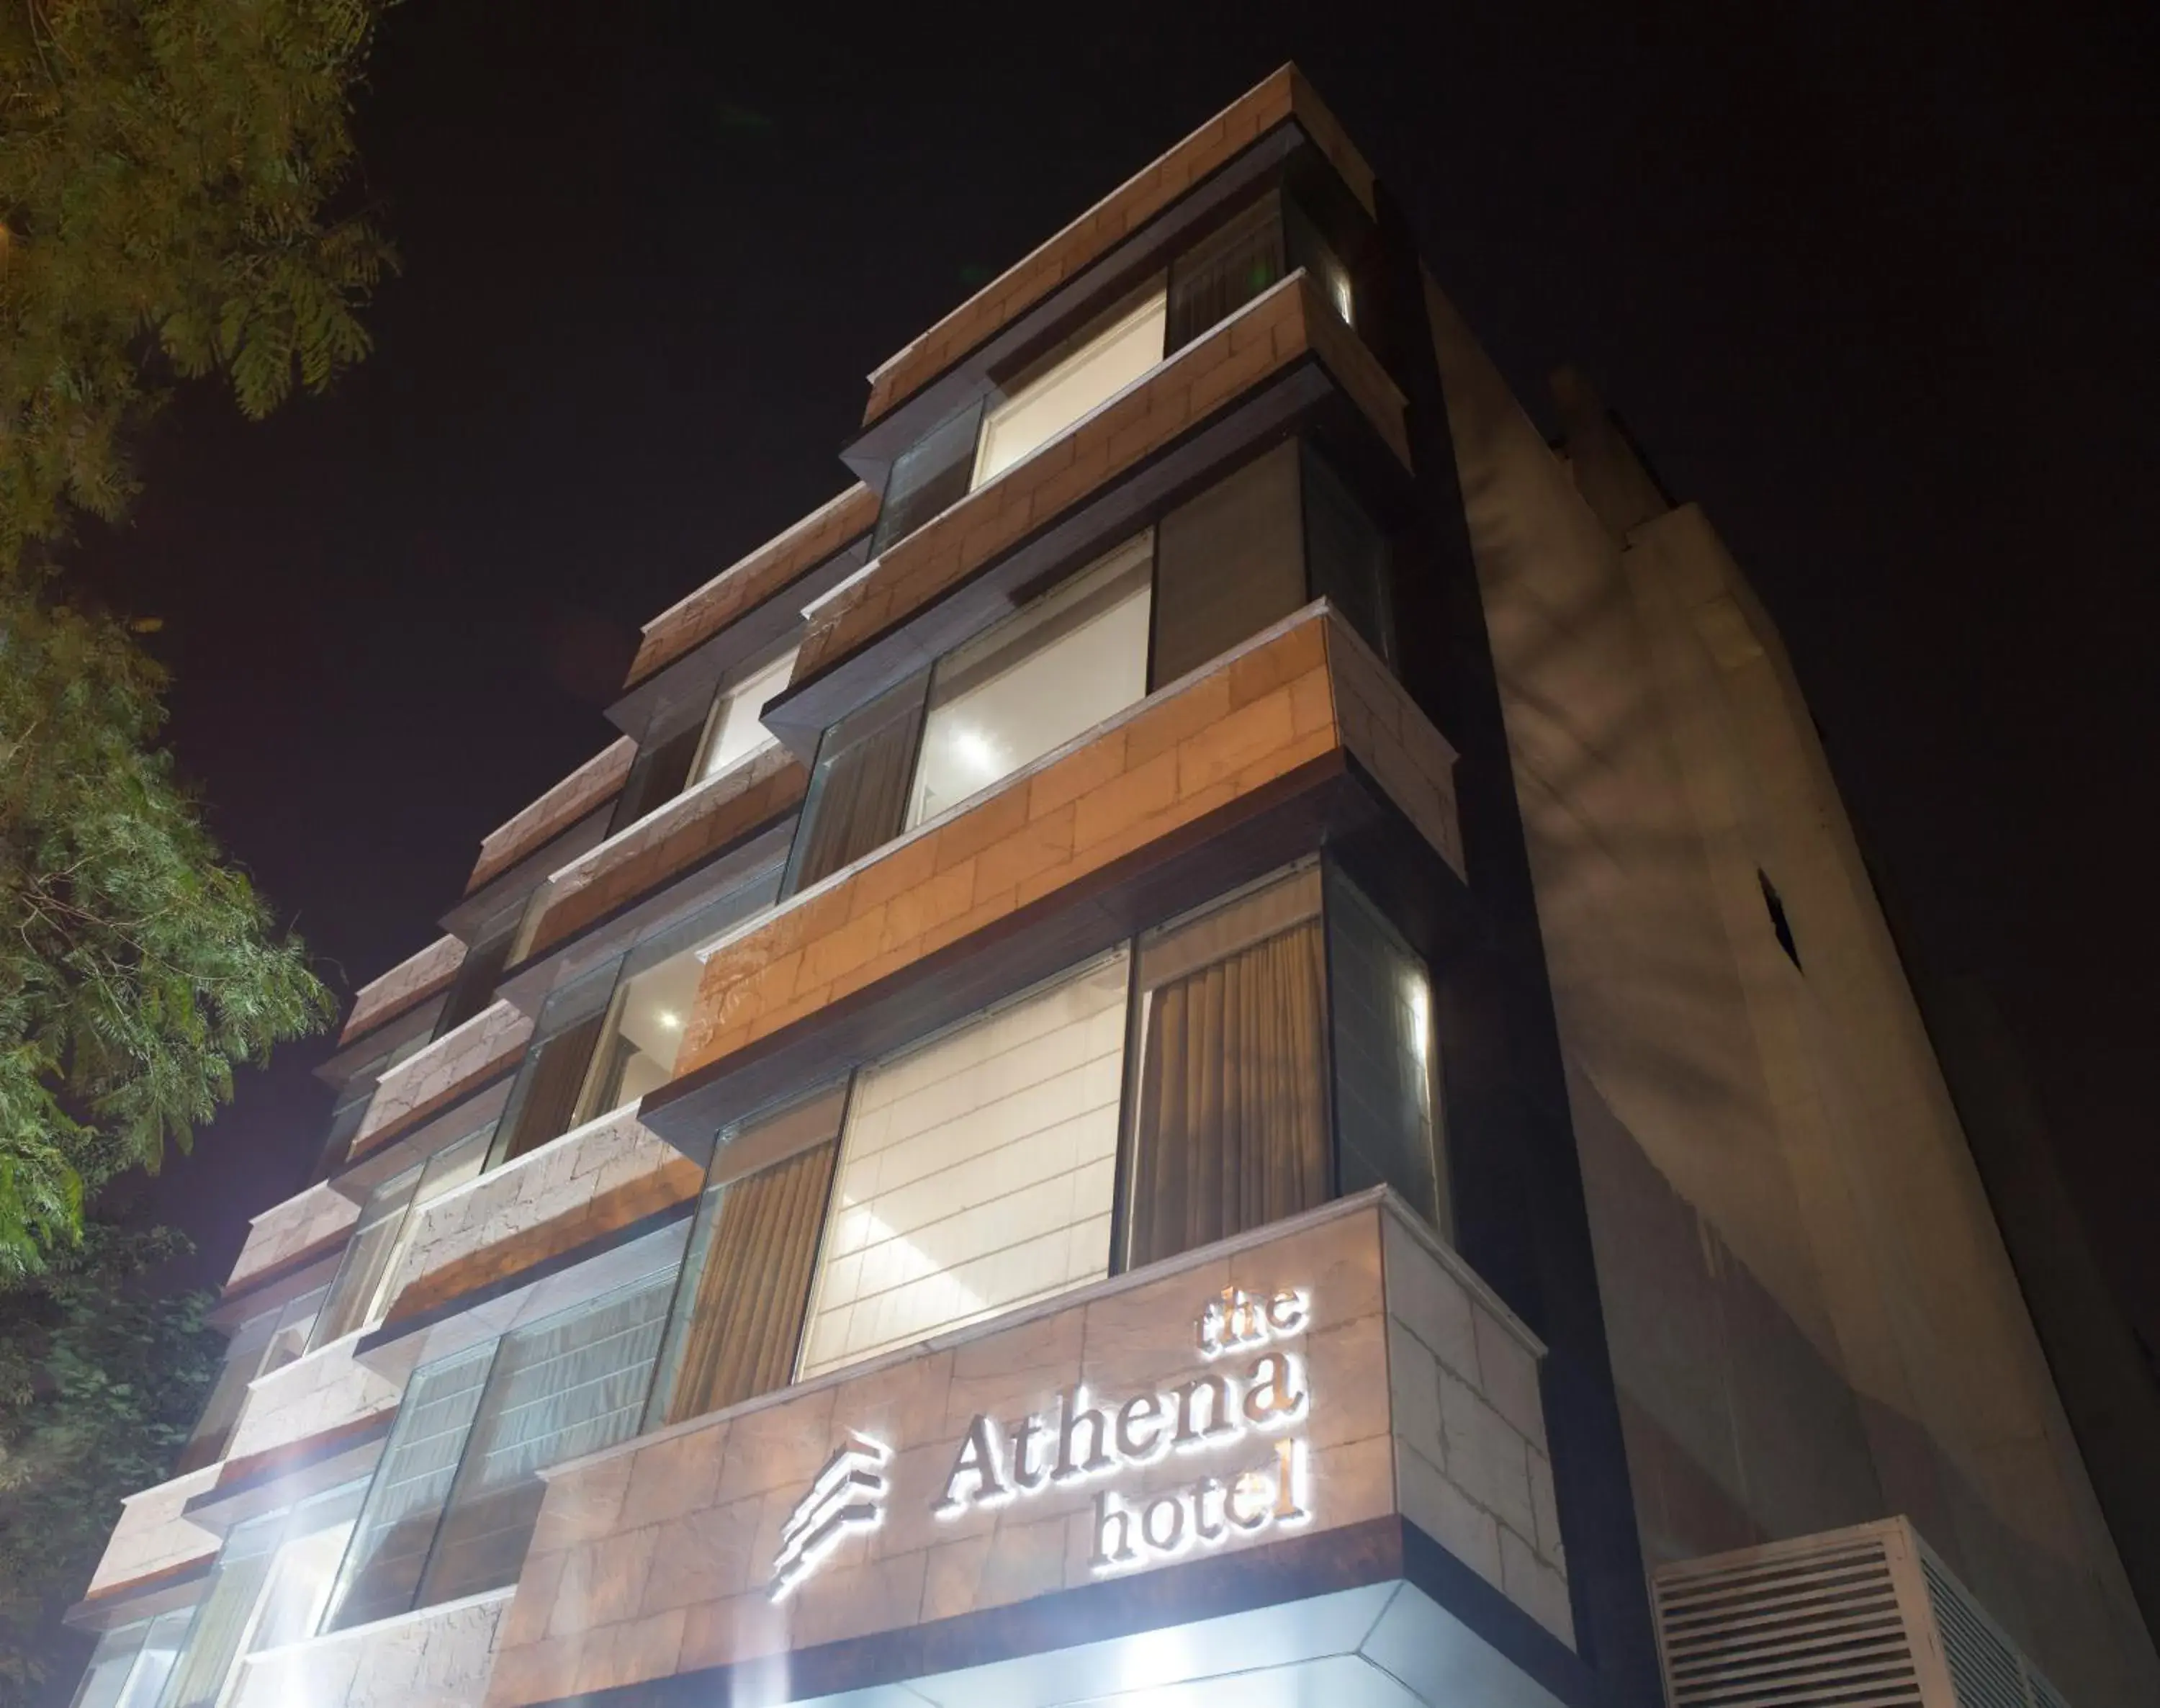 Property Building in The Athena Hotel